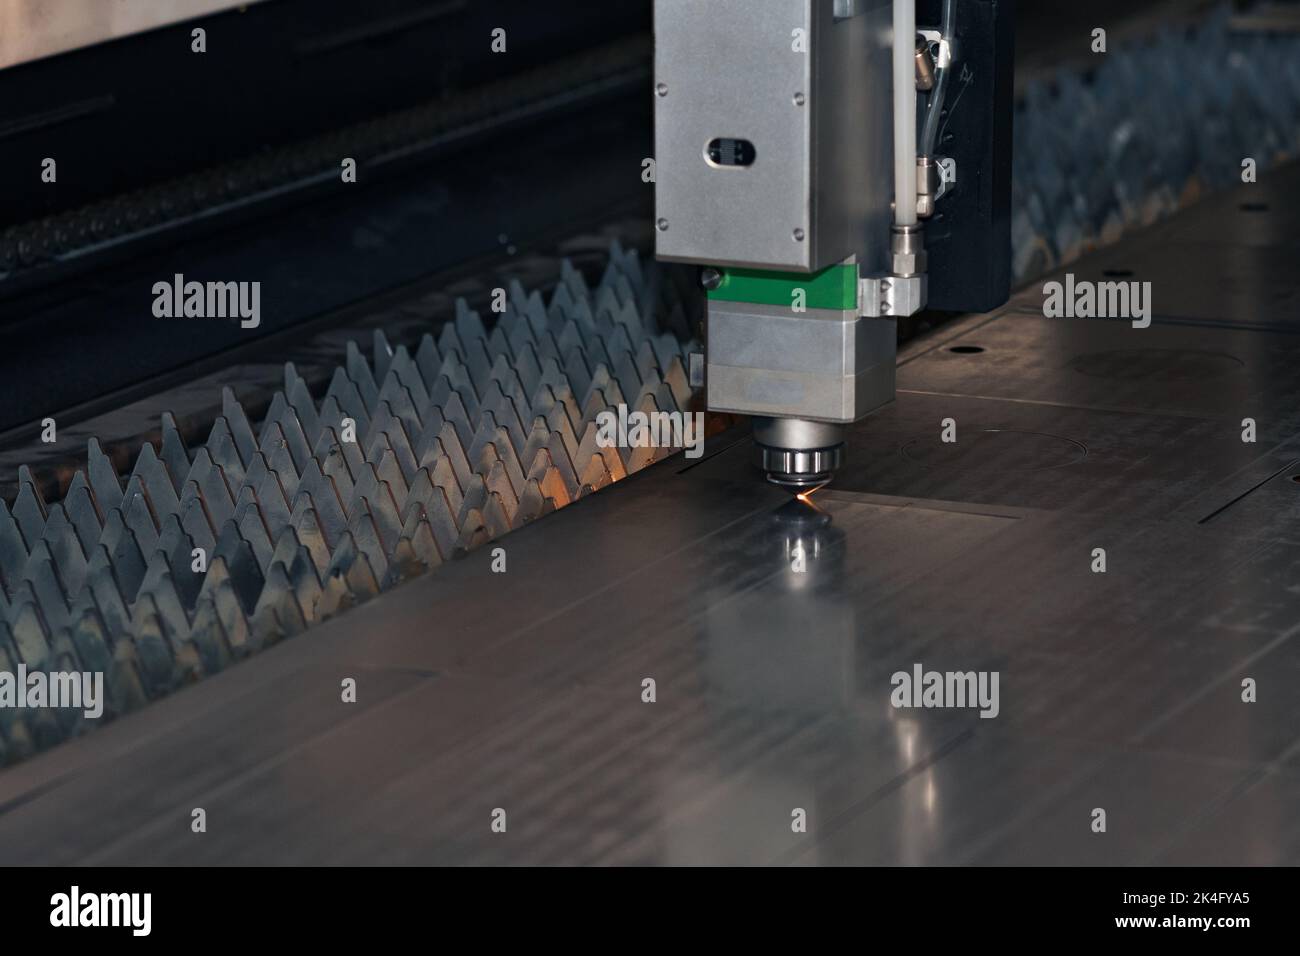 industrial laser cutter during metal sheet processing Stock Photo